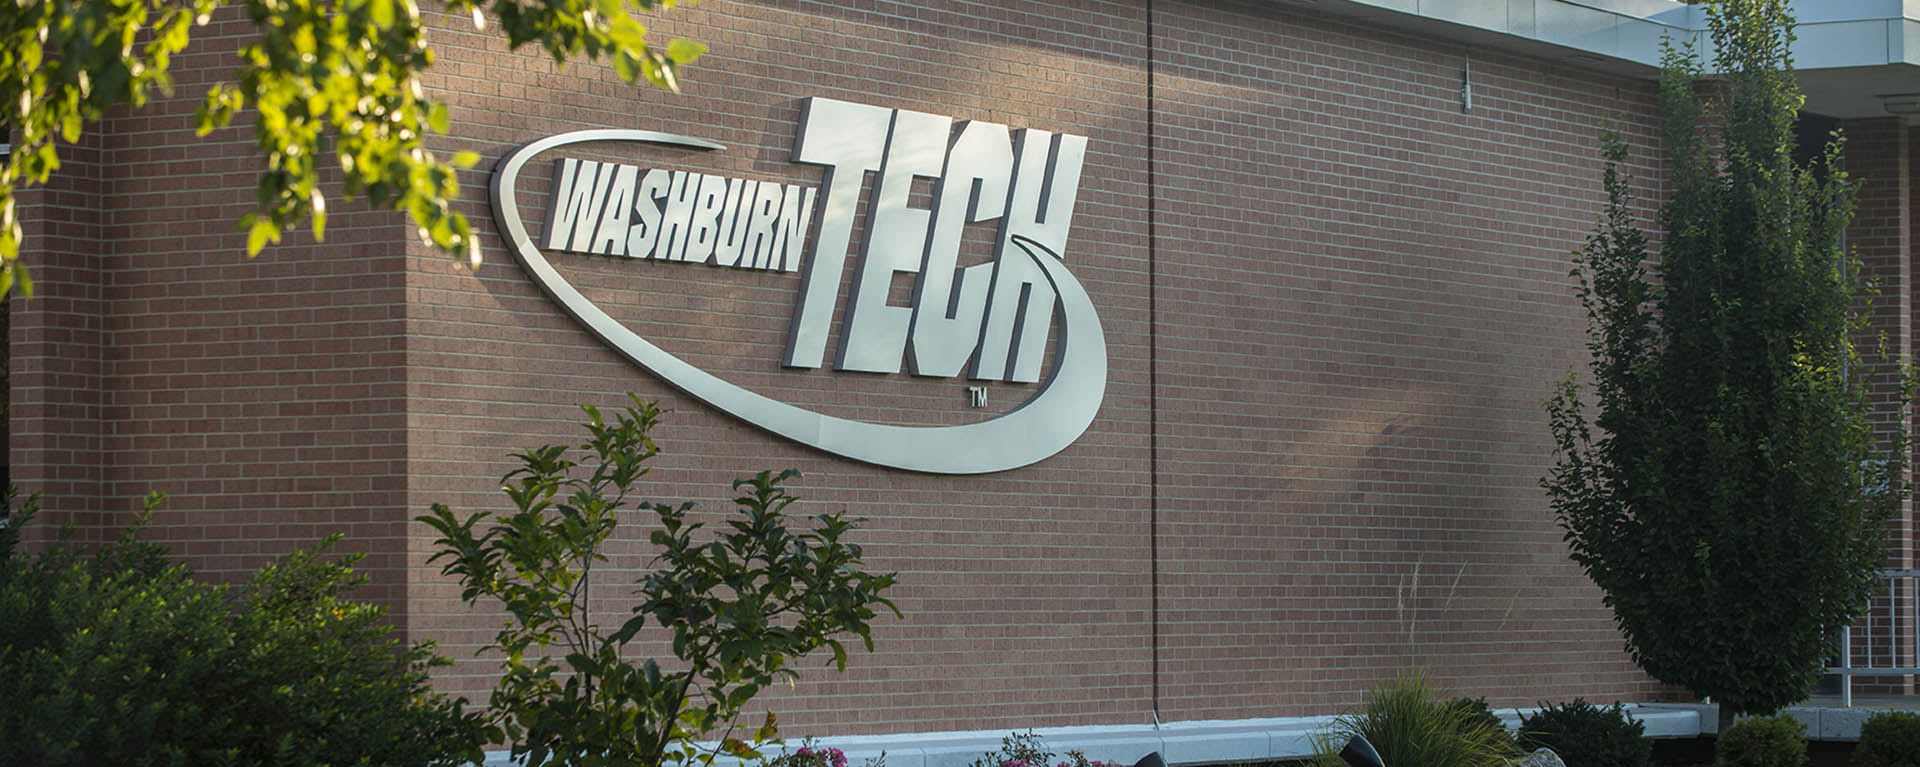 Washburn Tech sign on building.